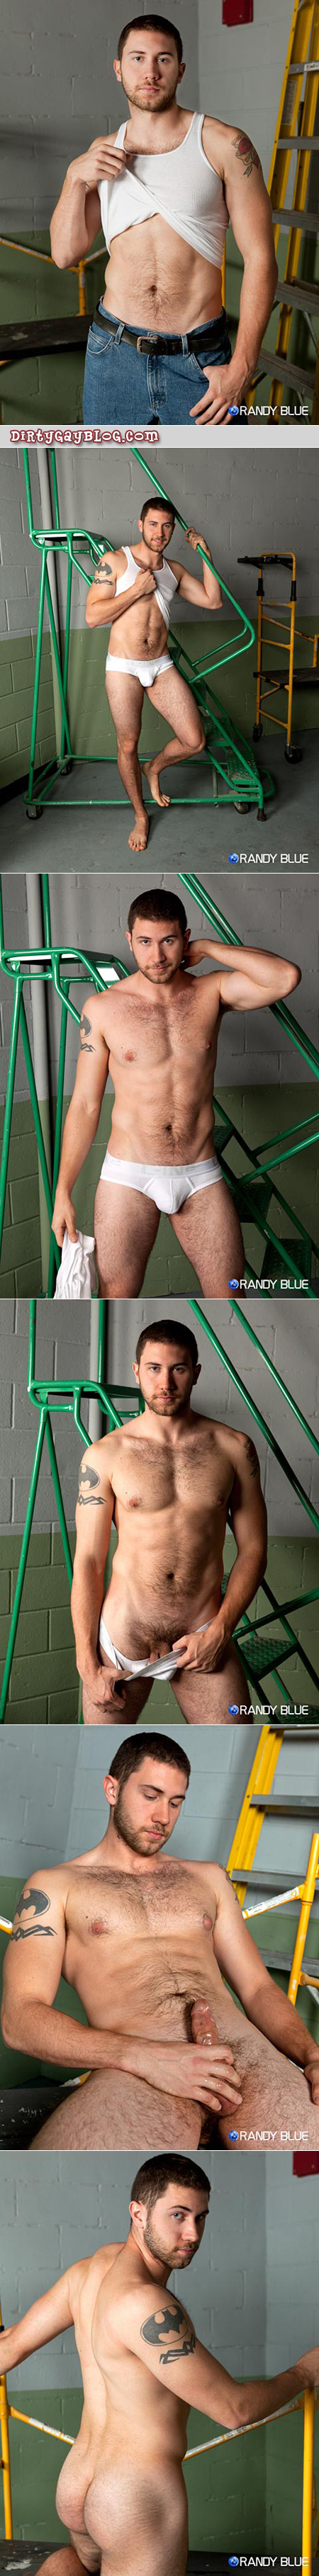 Furry young cub in white briefs plays with his hard dick and hairy ass.